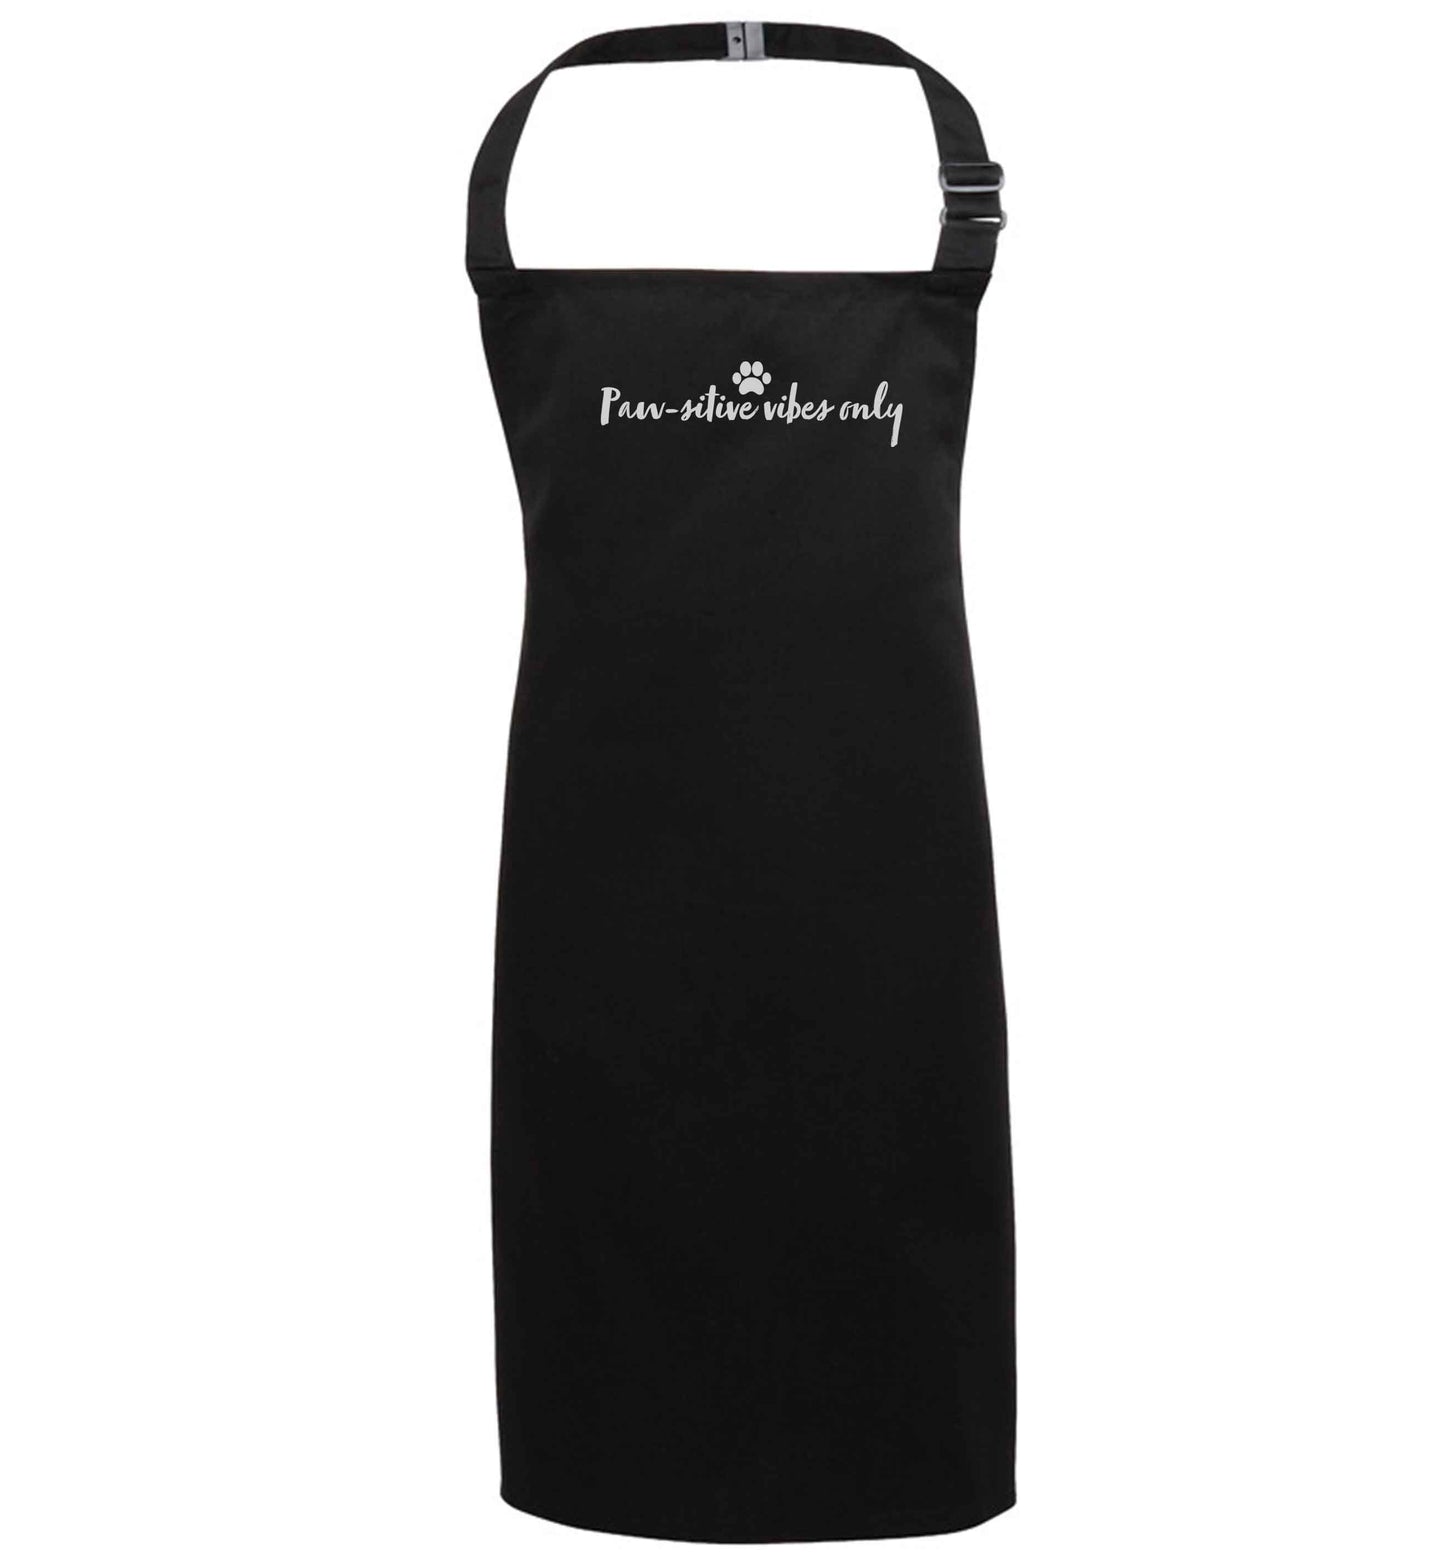 Pawsitive vibes only Kit black apron 7-10 years